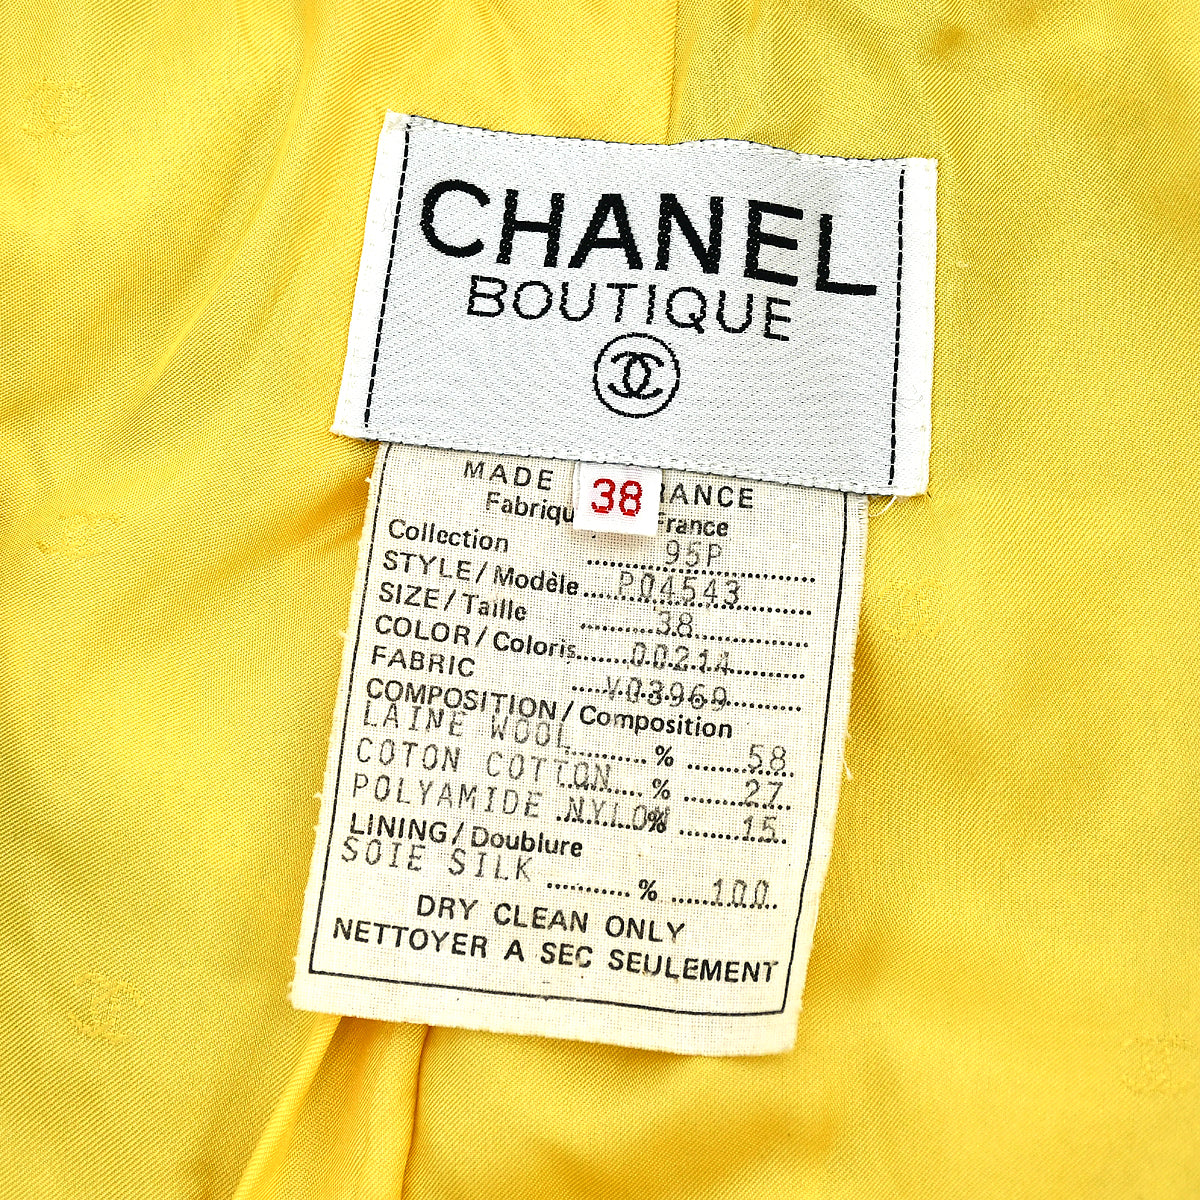 Chanel Single Breasted Jacket Yellow 95P 